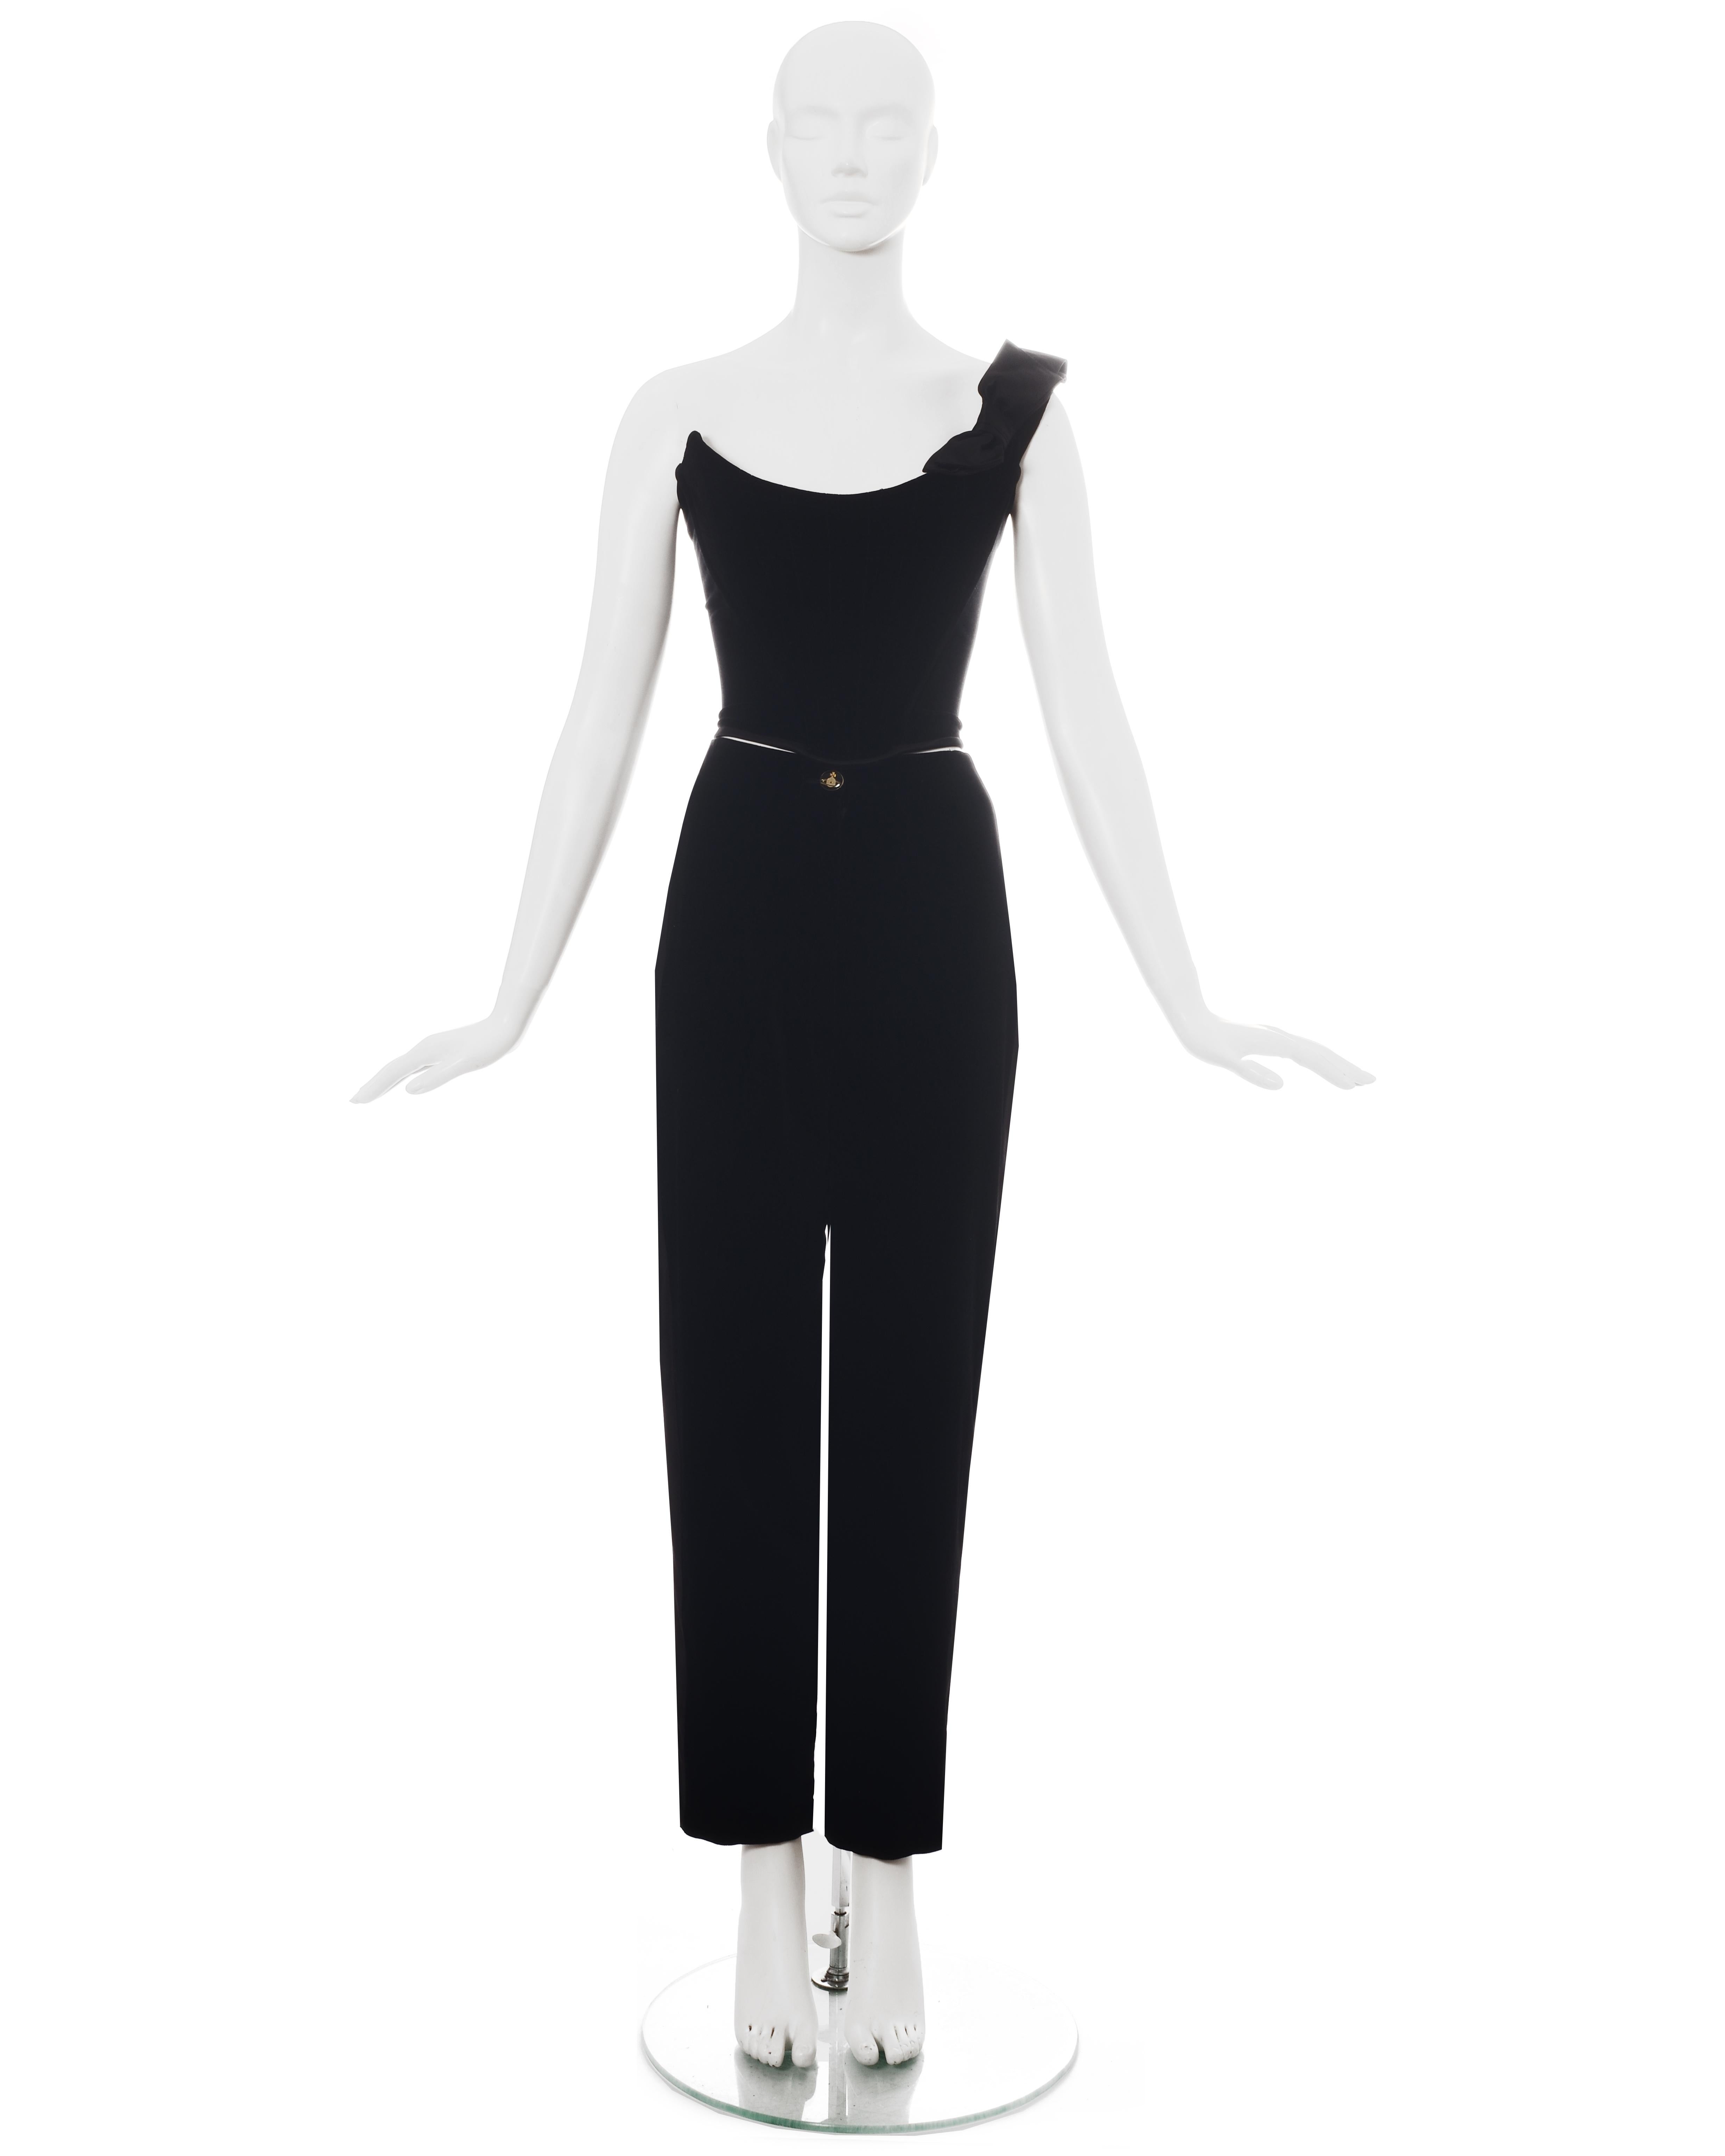 Vivienne Westwood black velvet pant suit comprising: velvet bustier corset with one shoulder strap and large satin bow; matching tuxedo pants with satin side panels and orb button closure.

Fall-Winter 1996